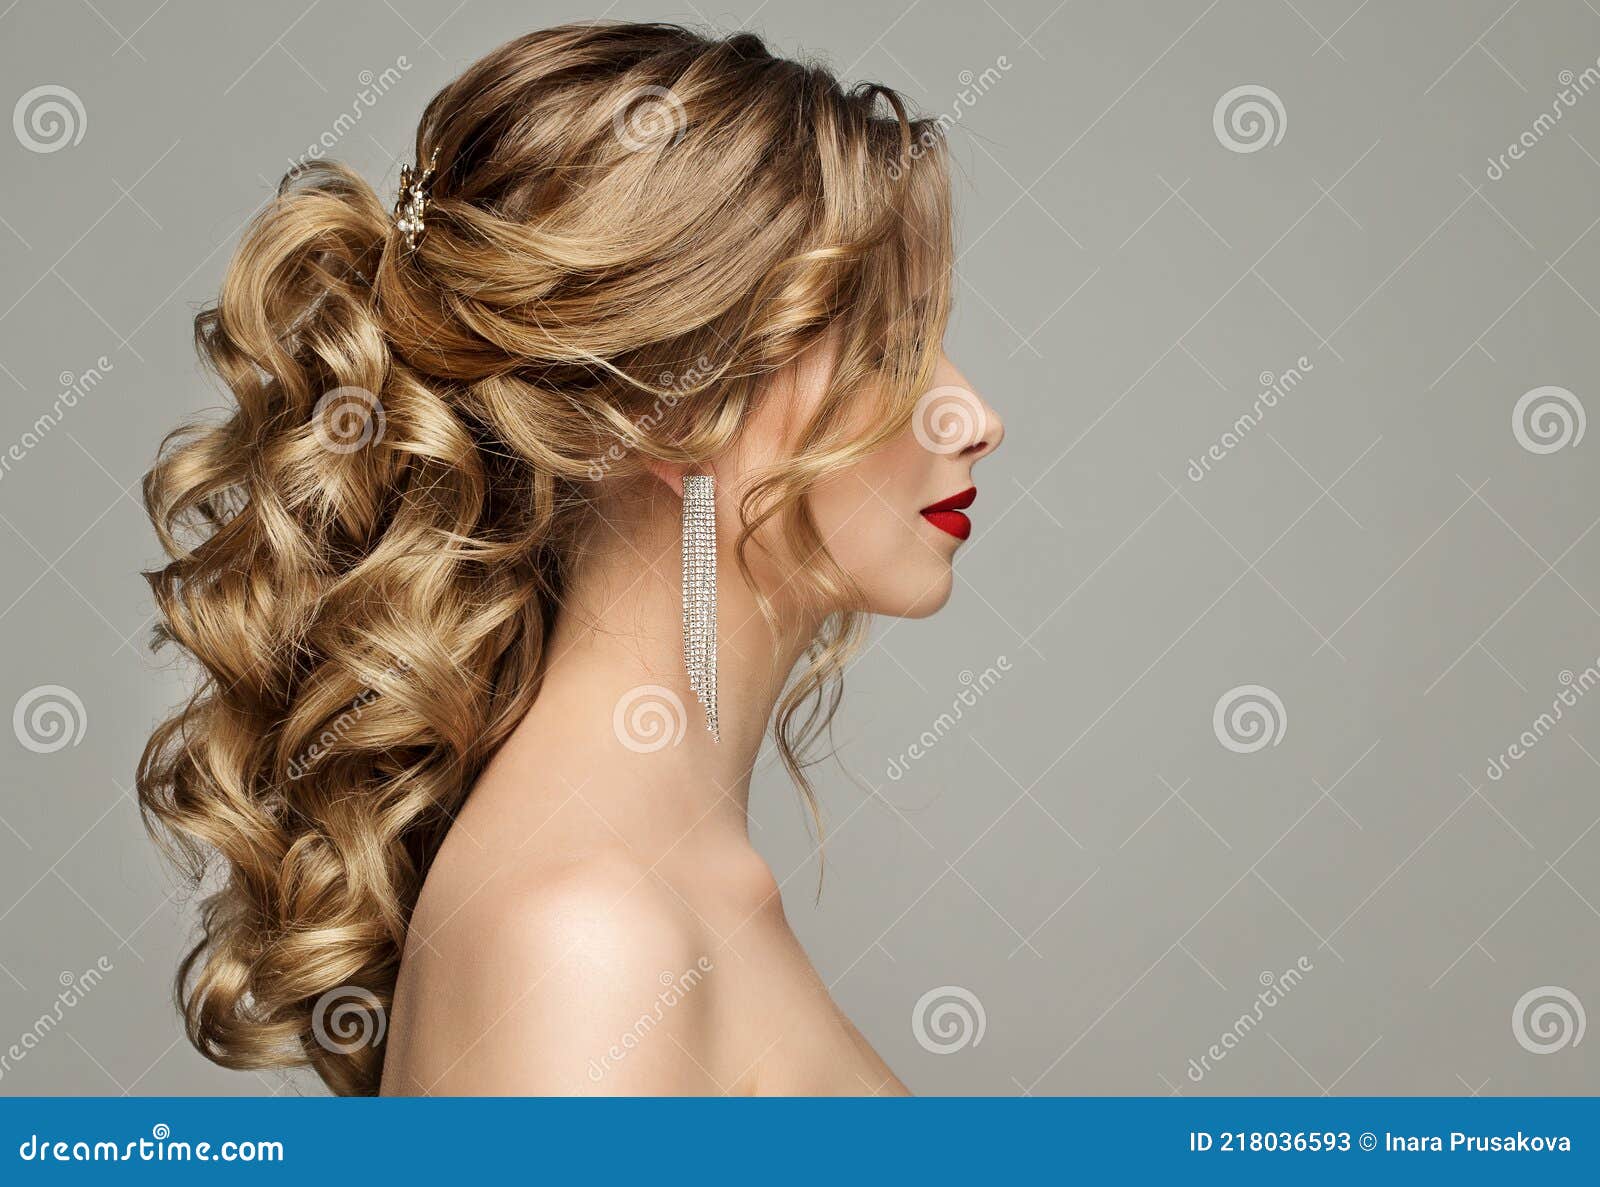 Beauty Woman Hair Style. Bride Wedding Hairstyle Side View. Fashion Model  Portrait with Elegant Curly Hairdo Over Gray Background Stock Image - Image  of evening, beautiful: 218036593